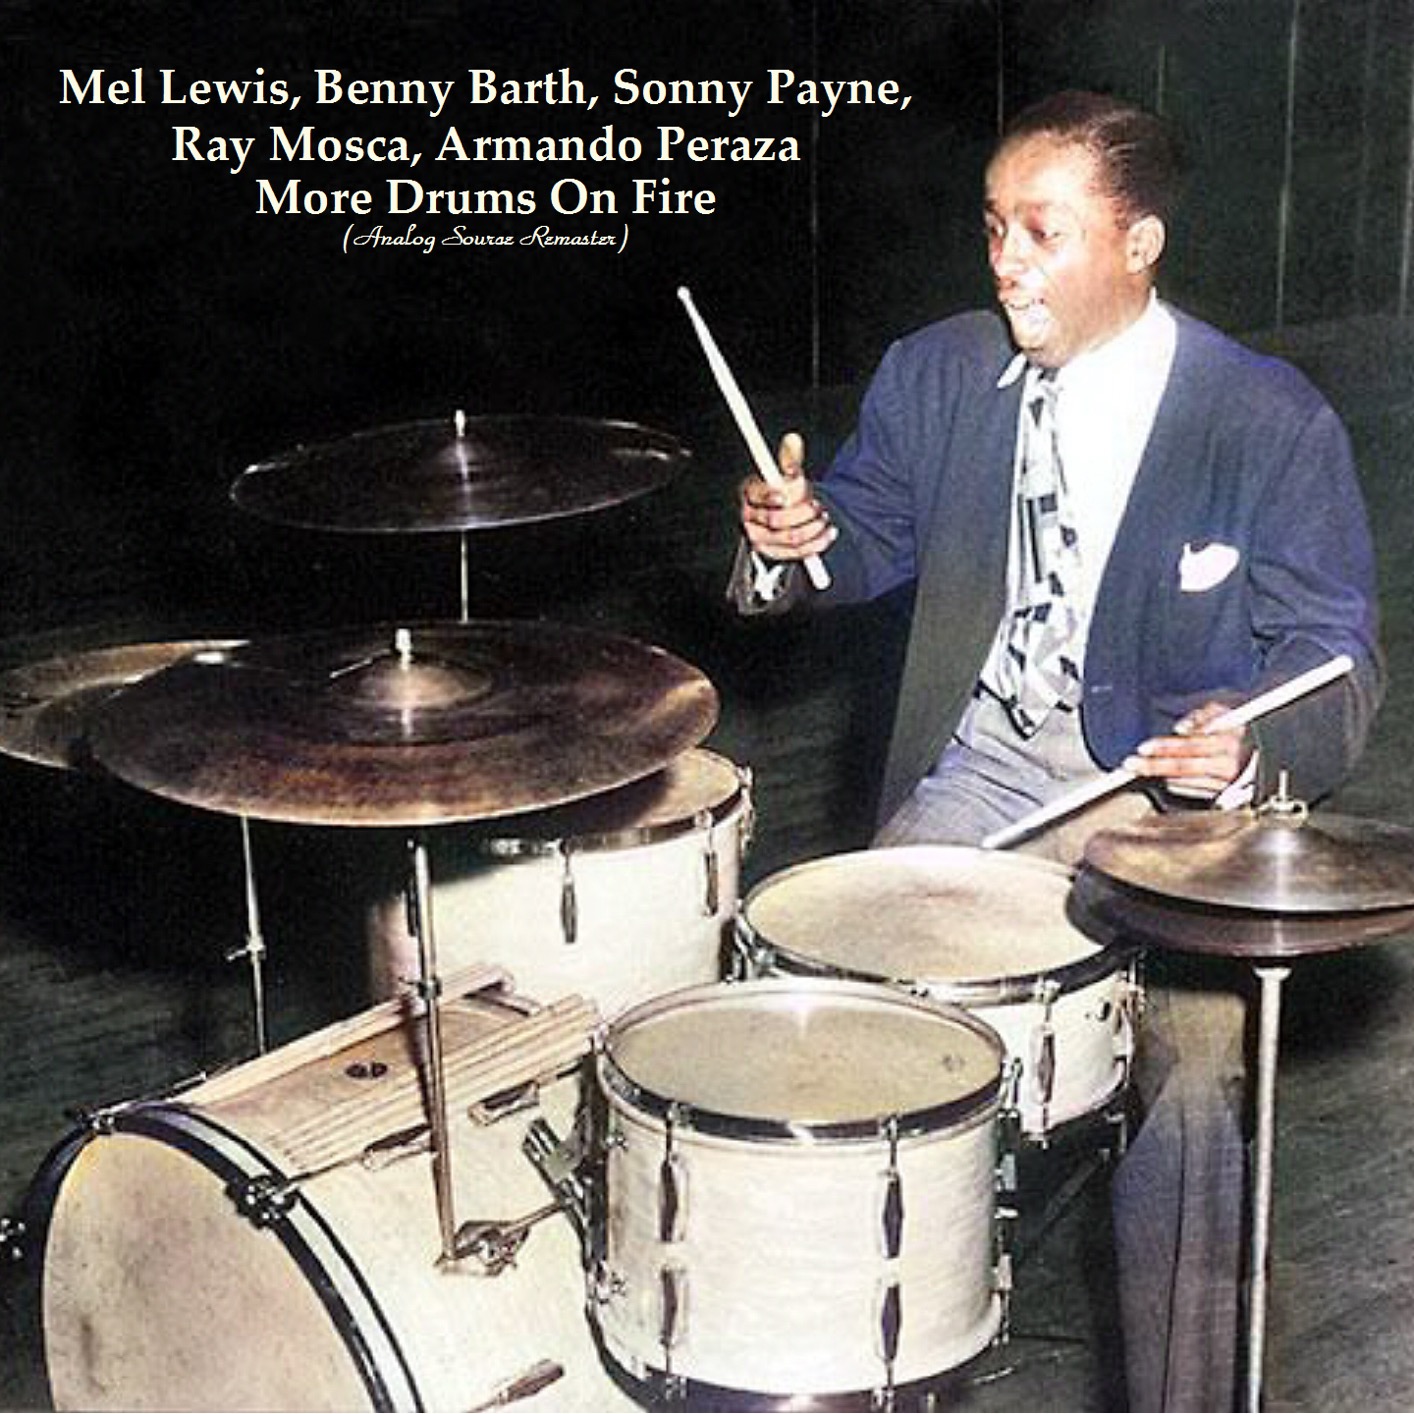 Mel Lewis, Benny Barth, Sonny Payne, Ray Mosca, Armando Peraza - More Drums On Fire (Analog Source Remaster) (2023) [FLAC 24bit/44,1kHz] Download